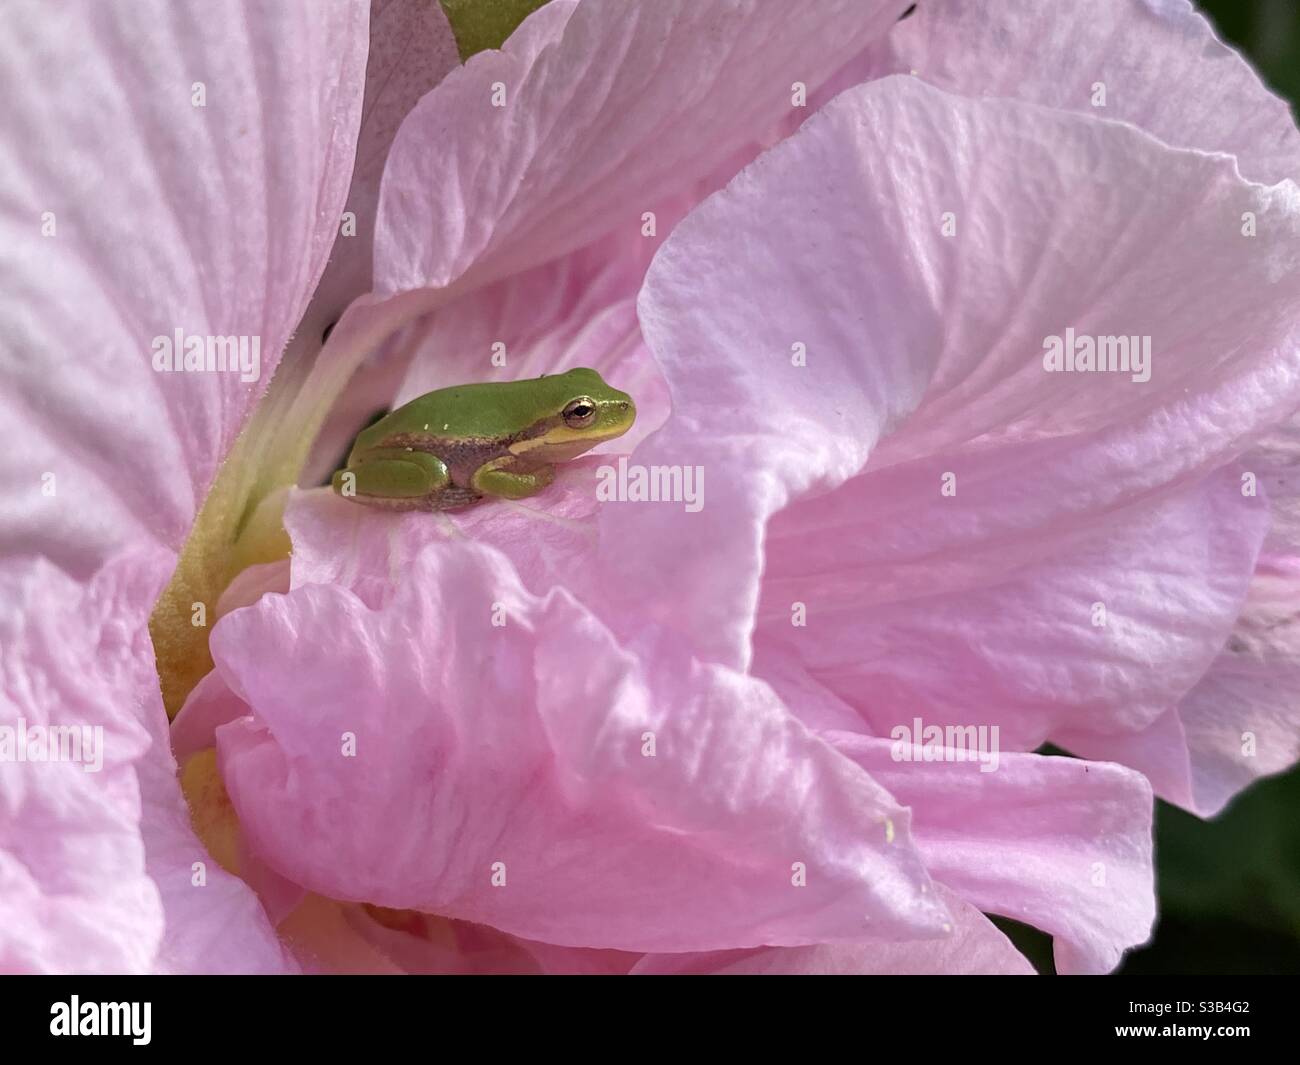 Baby green tree frog on pink flower Stock Photo